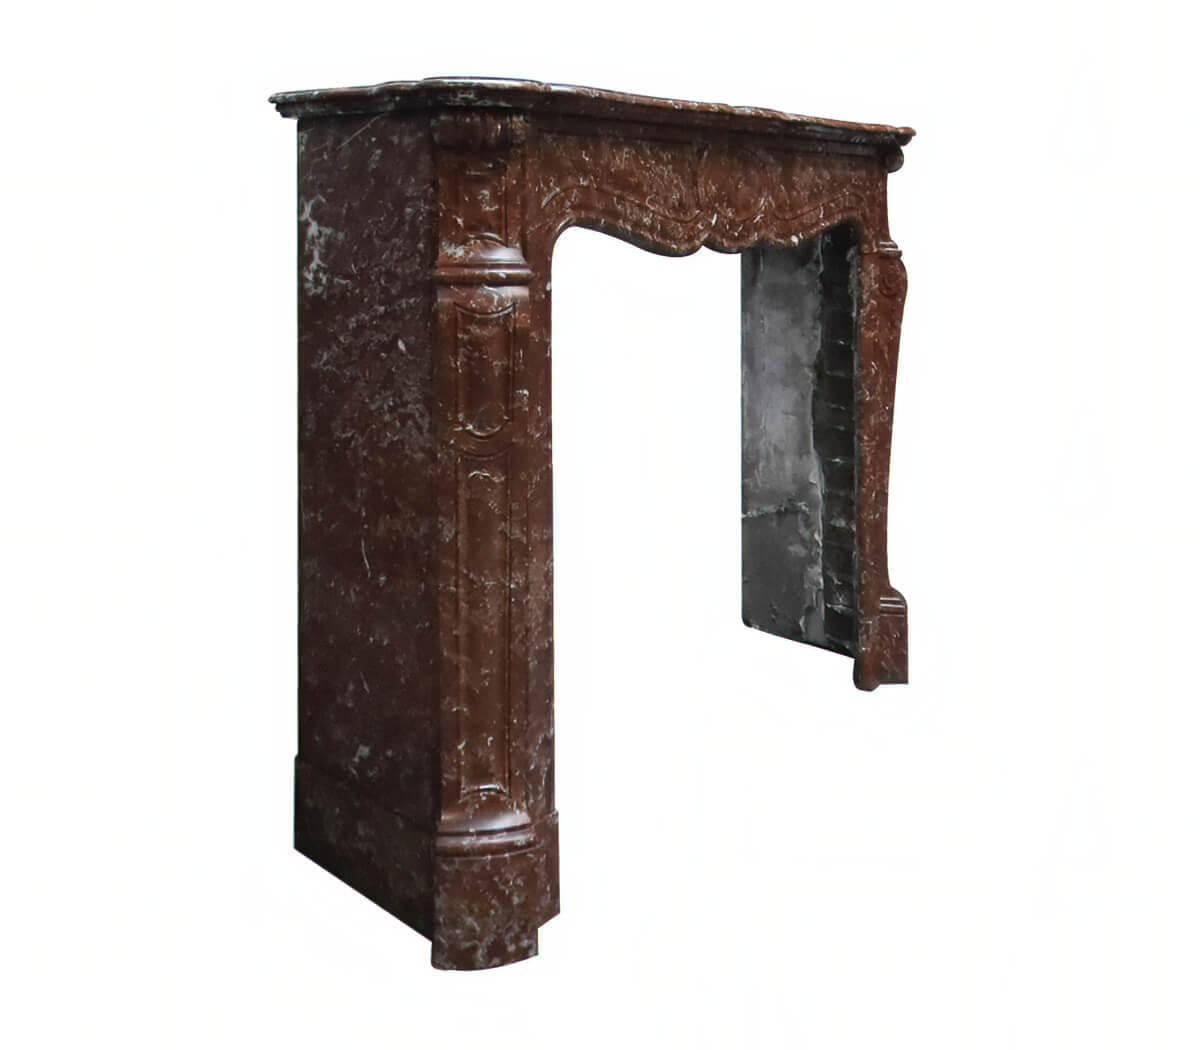 Rouge Pompadour marble fireplace mantel from the 19th Century
to place around the chimney.